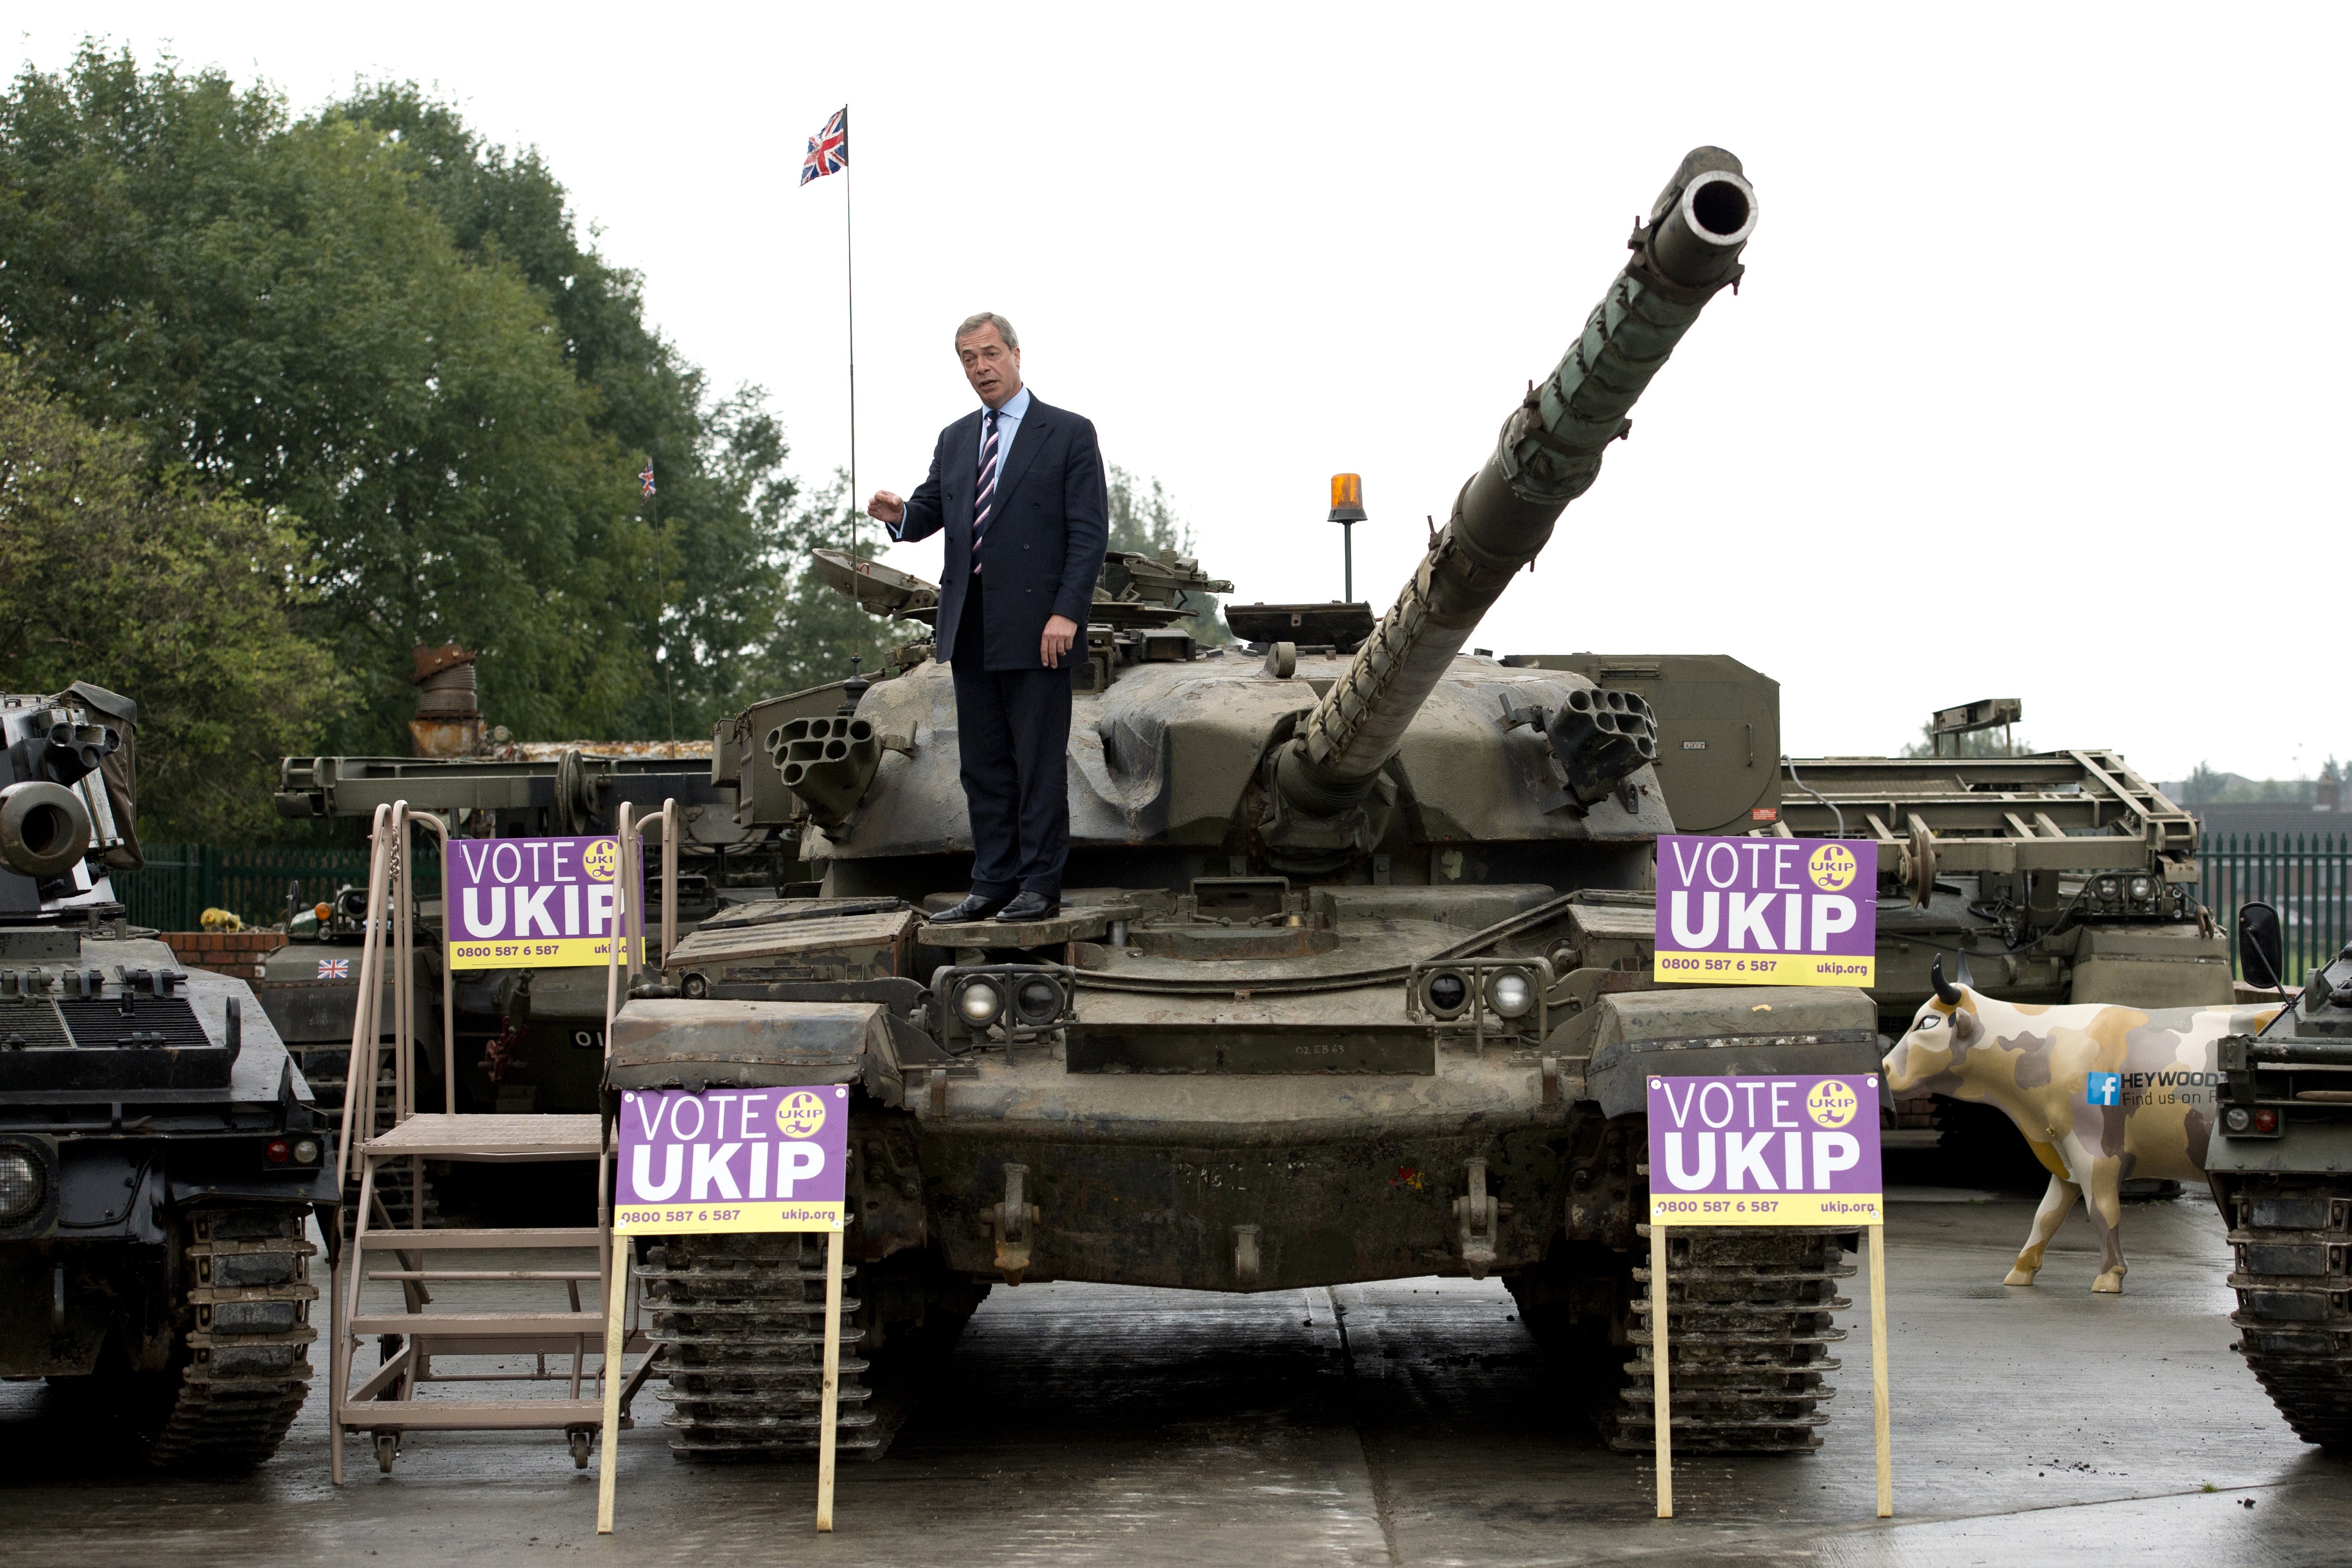 Nigel Farage, leader of the UK Independence Party (UKIP), poses for a photograph on top of a Chieftain tank at the Heywood Tank Museum in Heywood, Greater Manchester, on October 7, 2014, during his visit to the Heywood and Middleton by-election campaign.  AFP PHOTO / OLI SCARFF        (Photo credit should read OLI SCARFF/AFP/Getty Images)